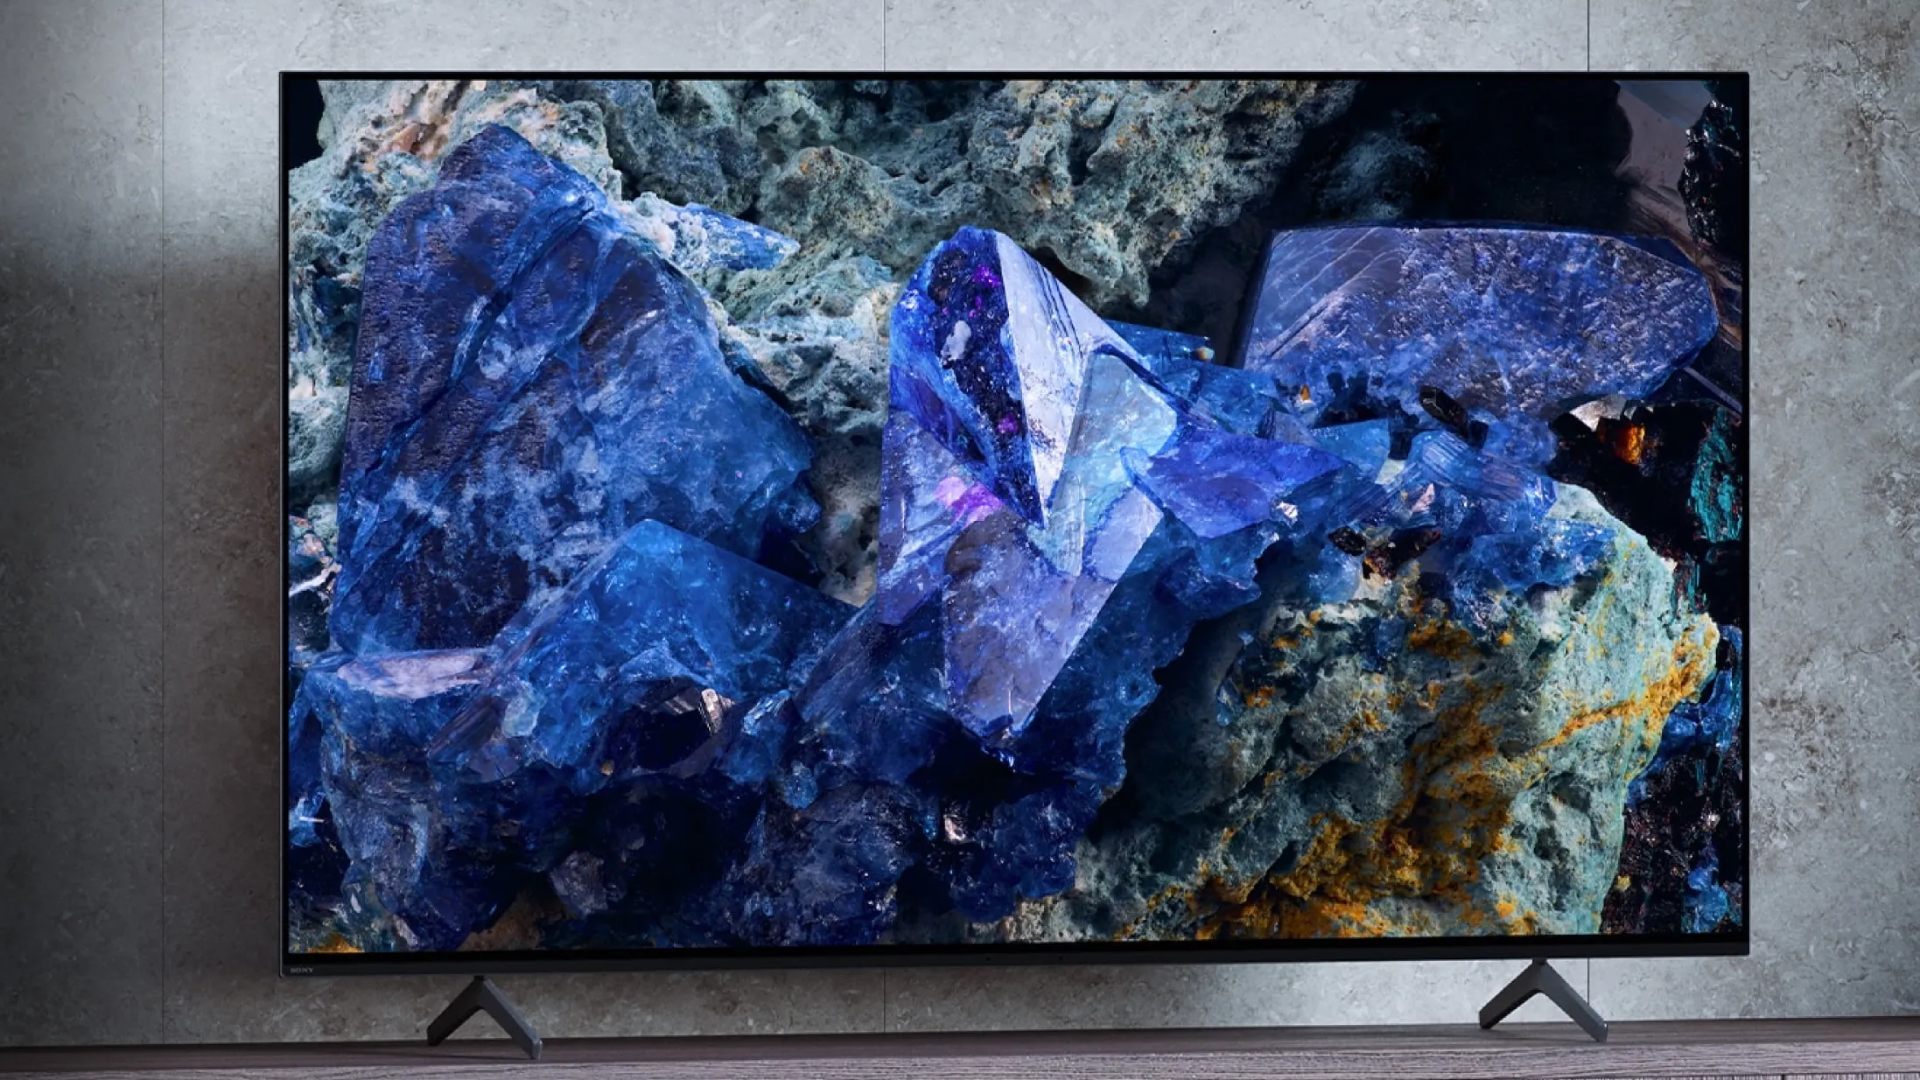 Sony Bravia XR A75L sitting on TV unit with blue crystals on screen